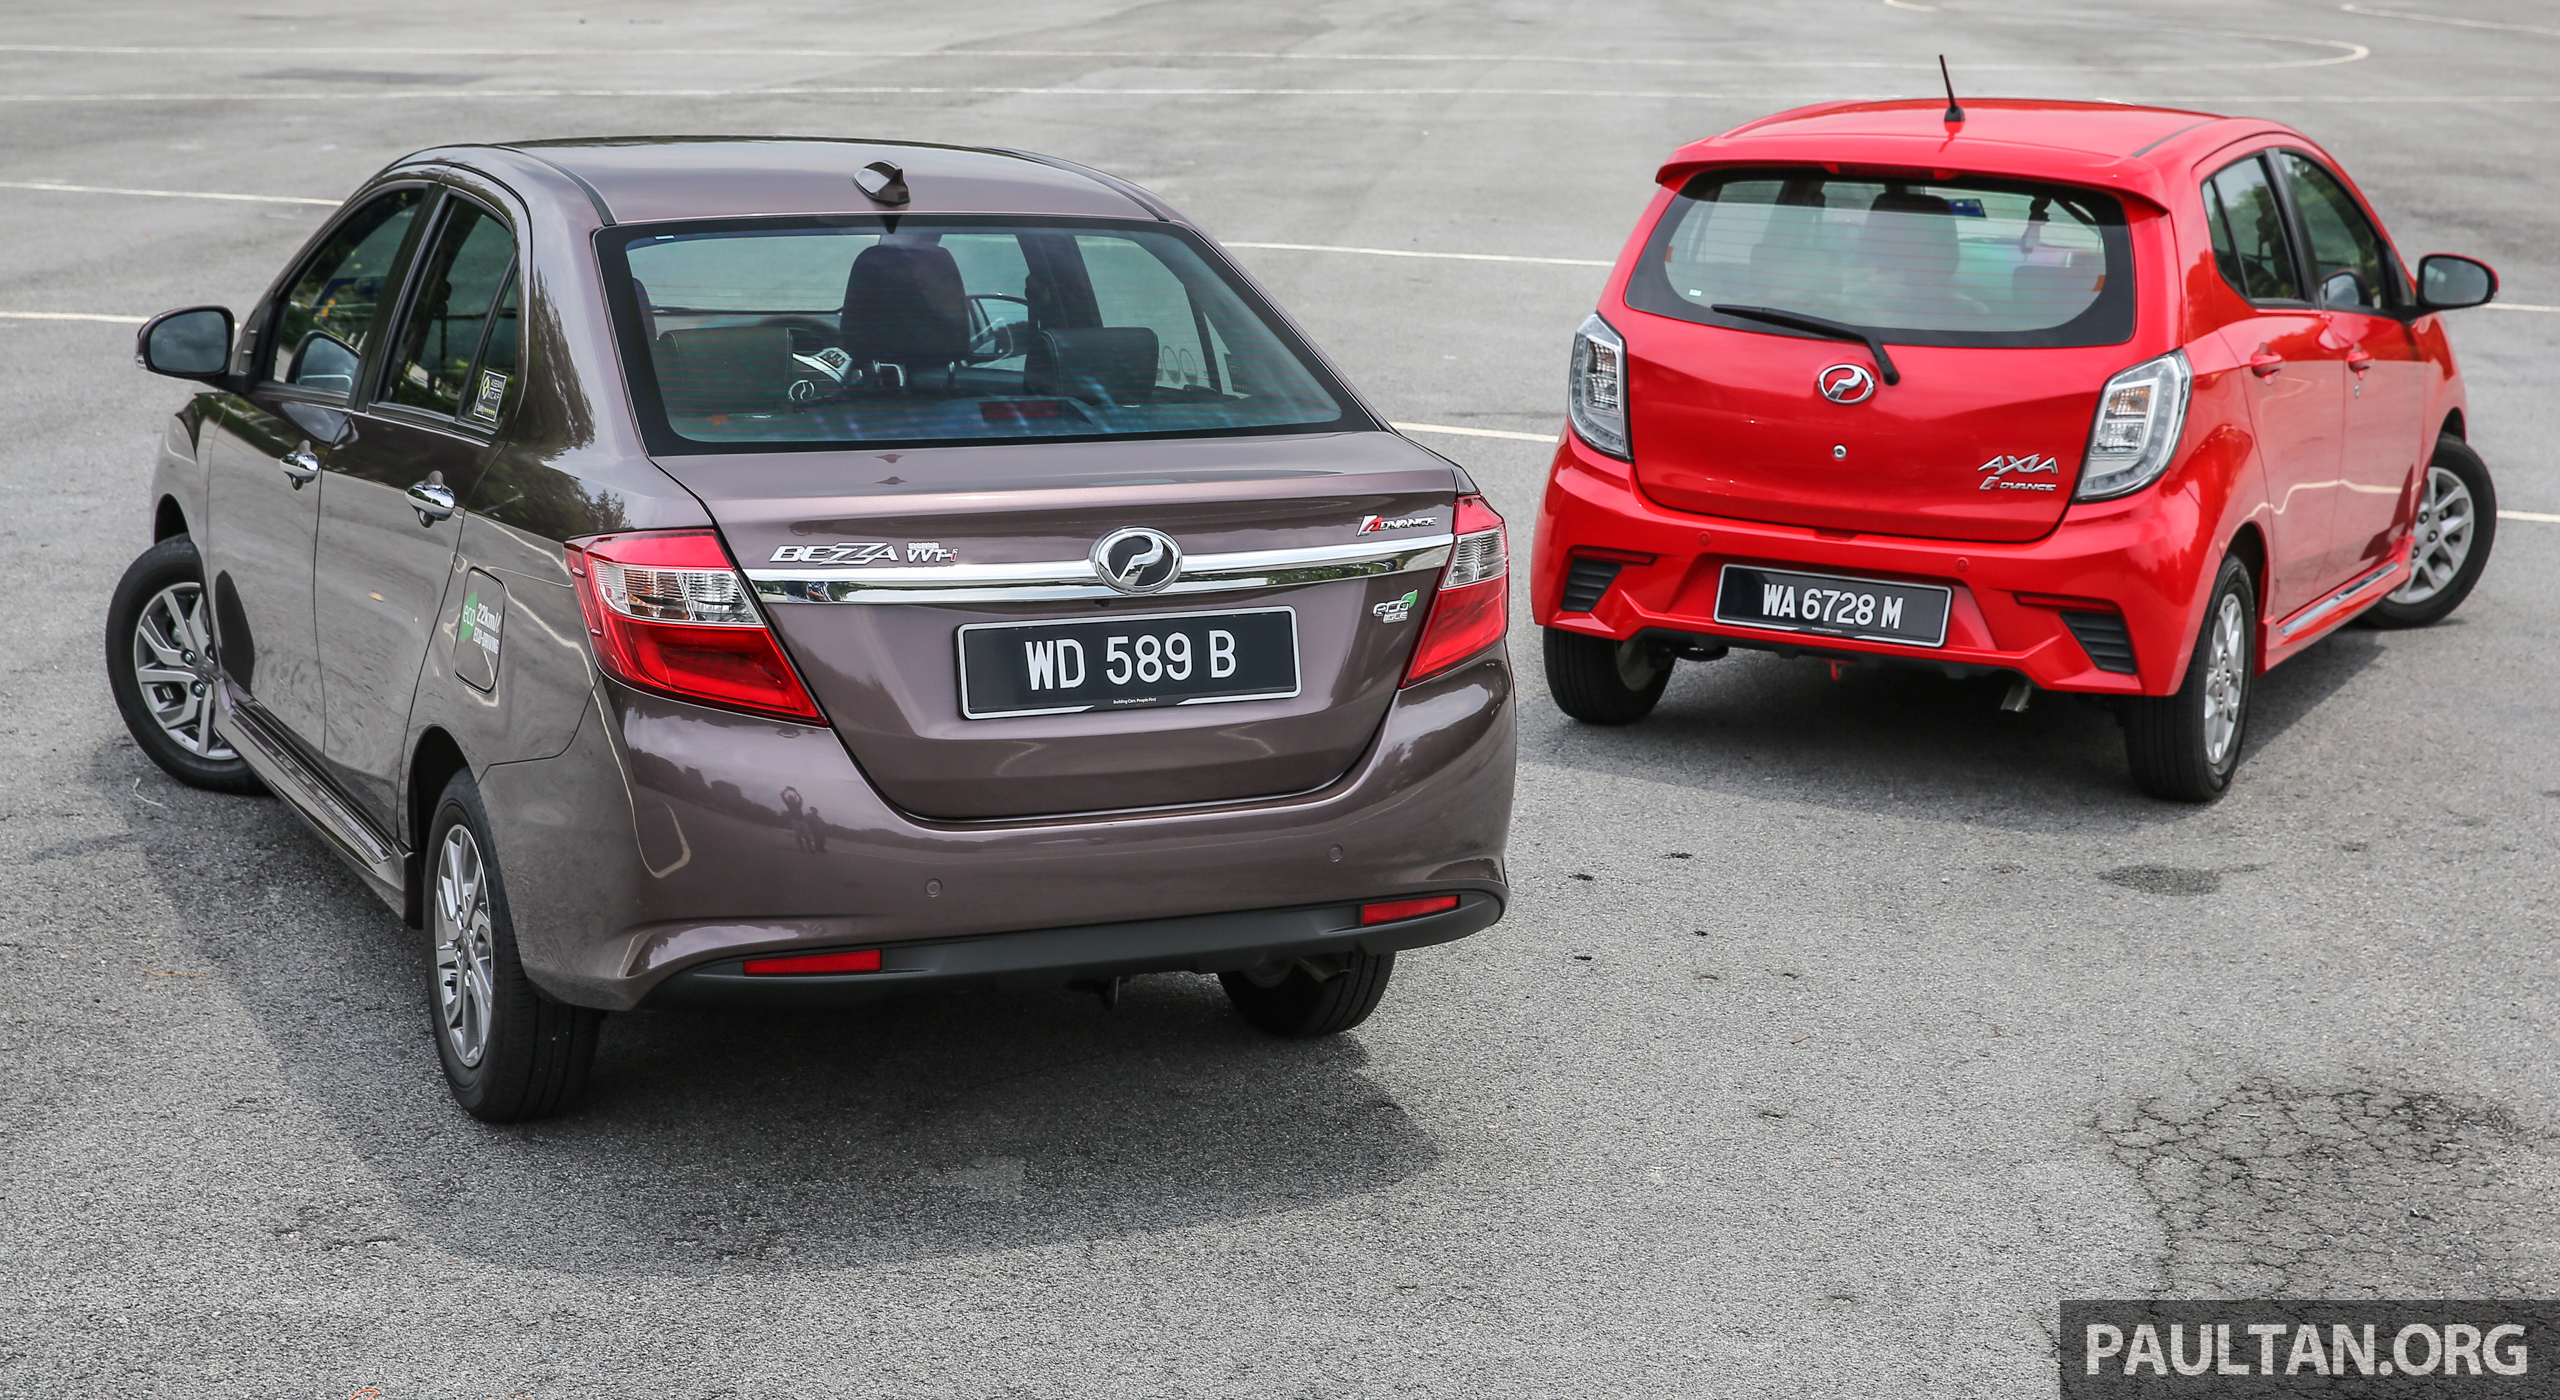 Perodua looking forward to a strong fourth quarter, on 